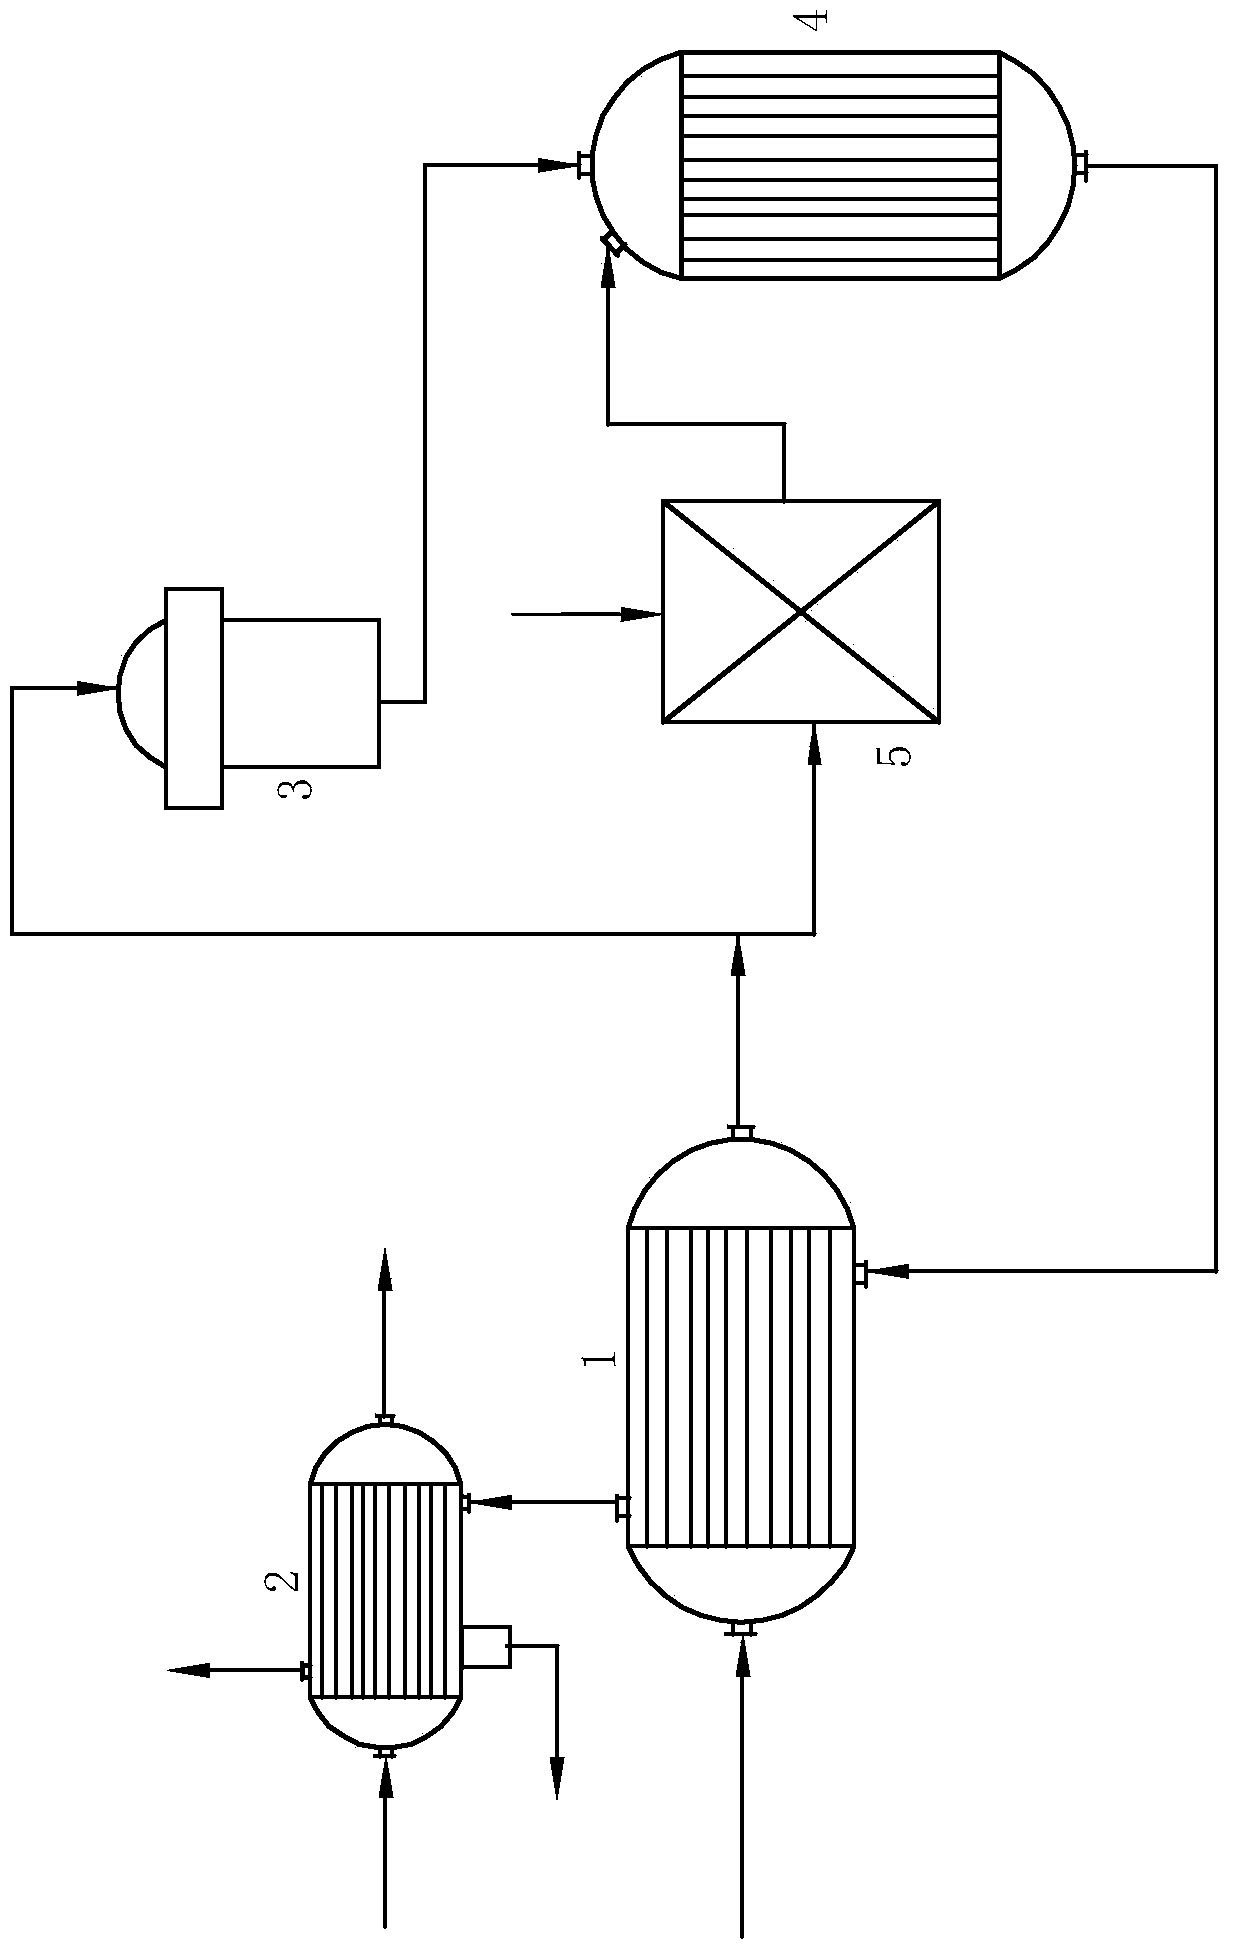 Treatment method of cycle tail gas in Fischer-Tropsch synthetic oil process